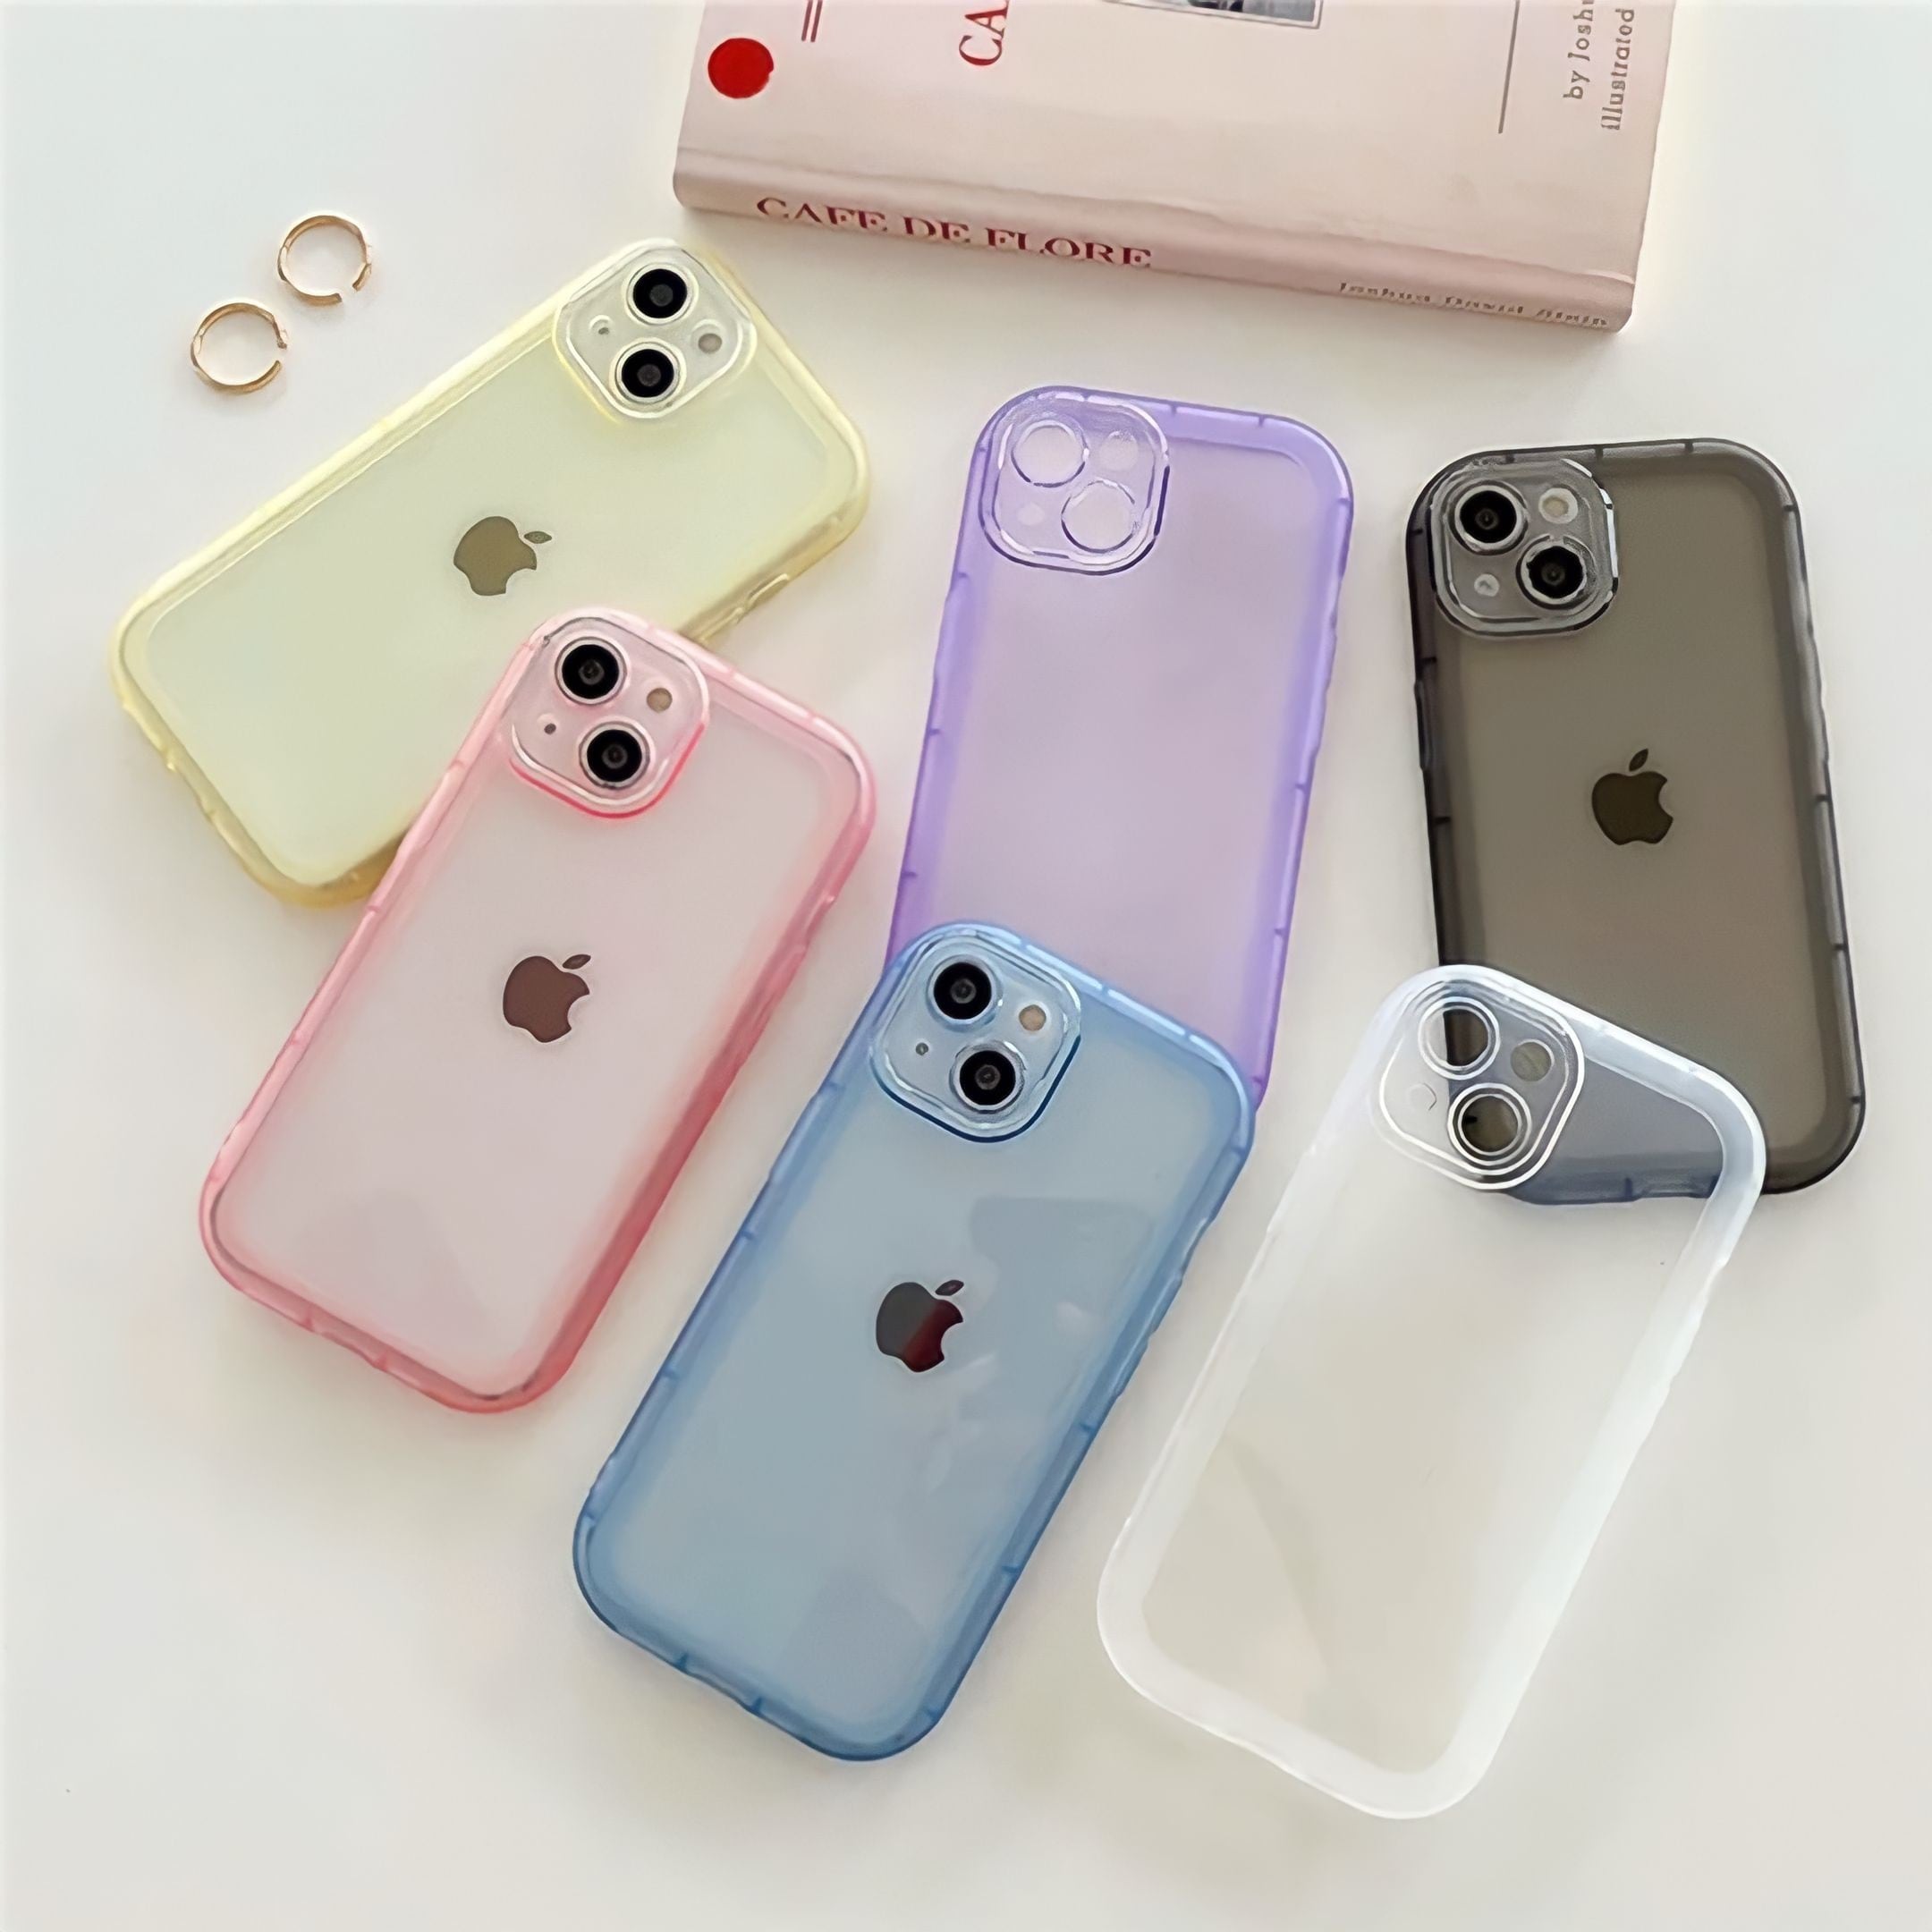 A390】6ColorSimple Clear iPhonecase iPhoneケース あいふぉんけーす